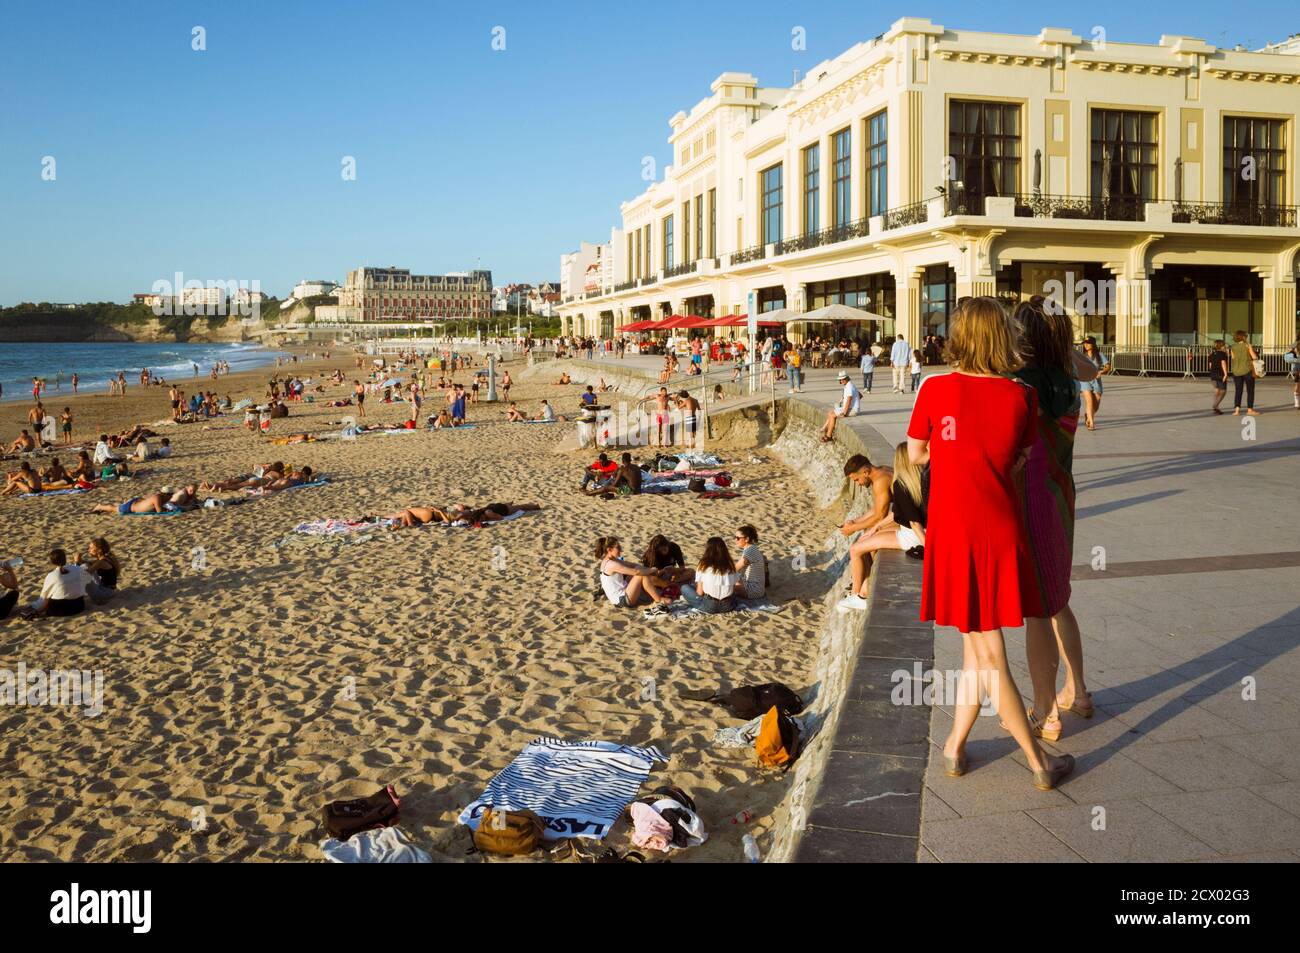 Biarritz, French Basque Country, France - July 19th, 2019 : Two women look at La Grande Plage, the town's largest beach with the Art deco Casino of Bi Stock Photo